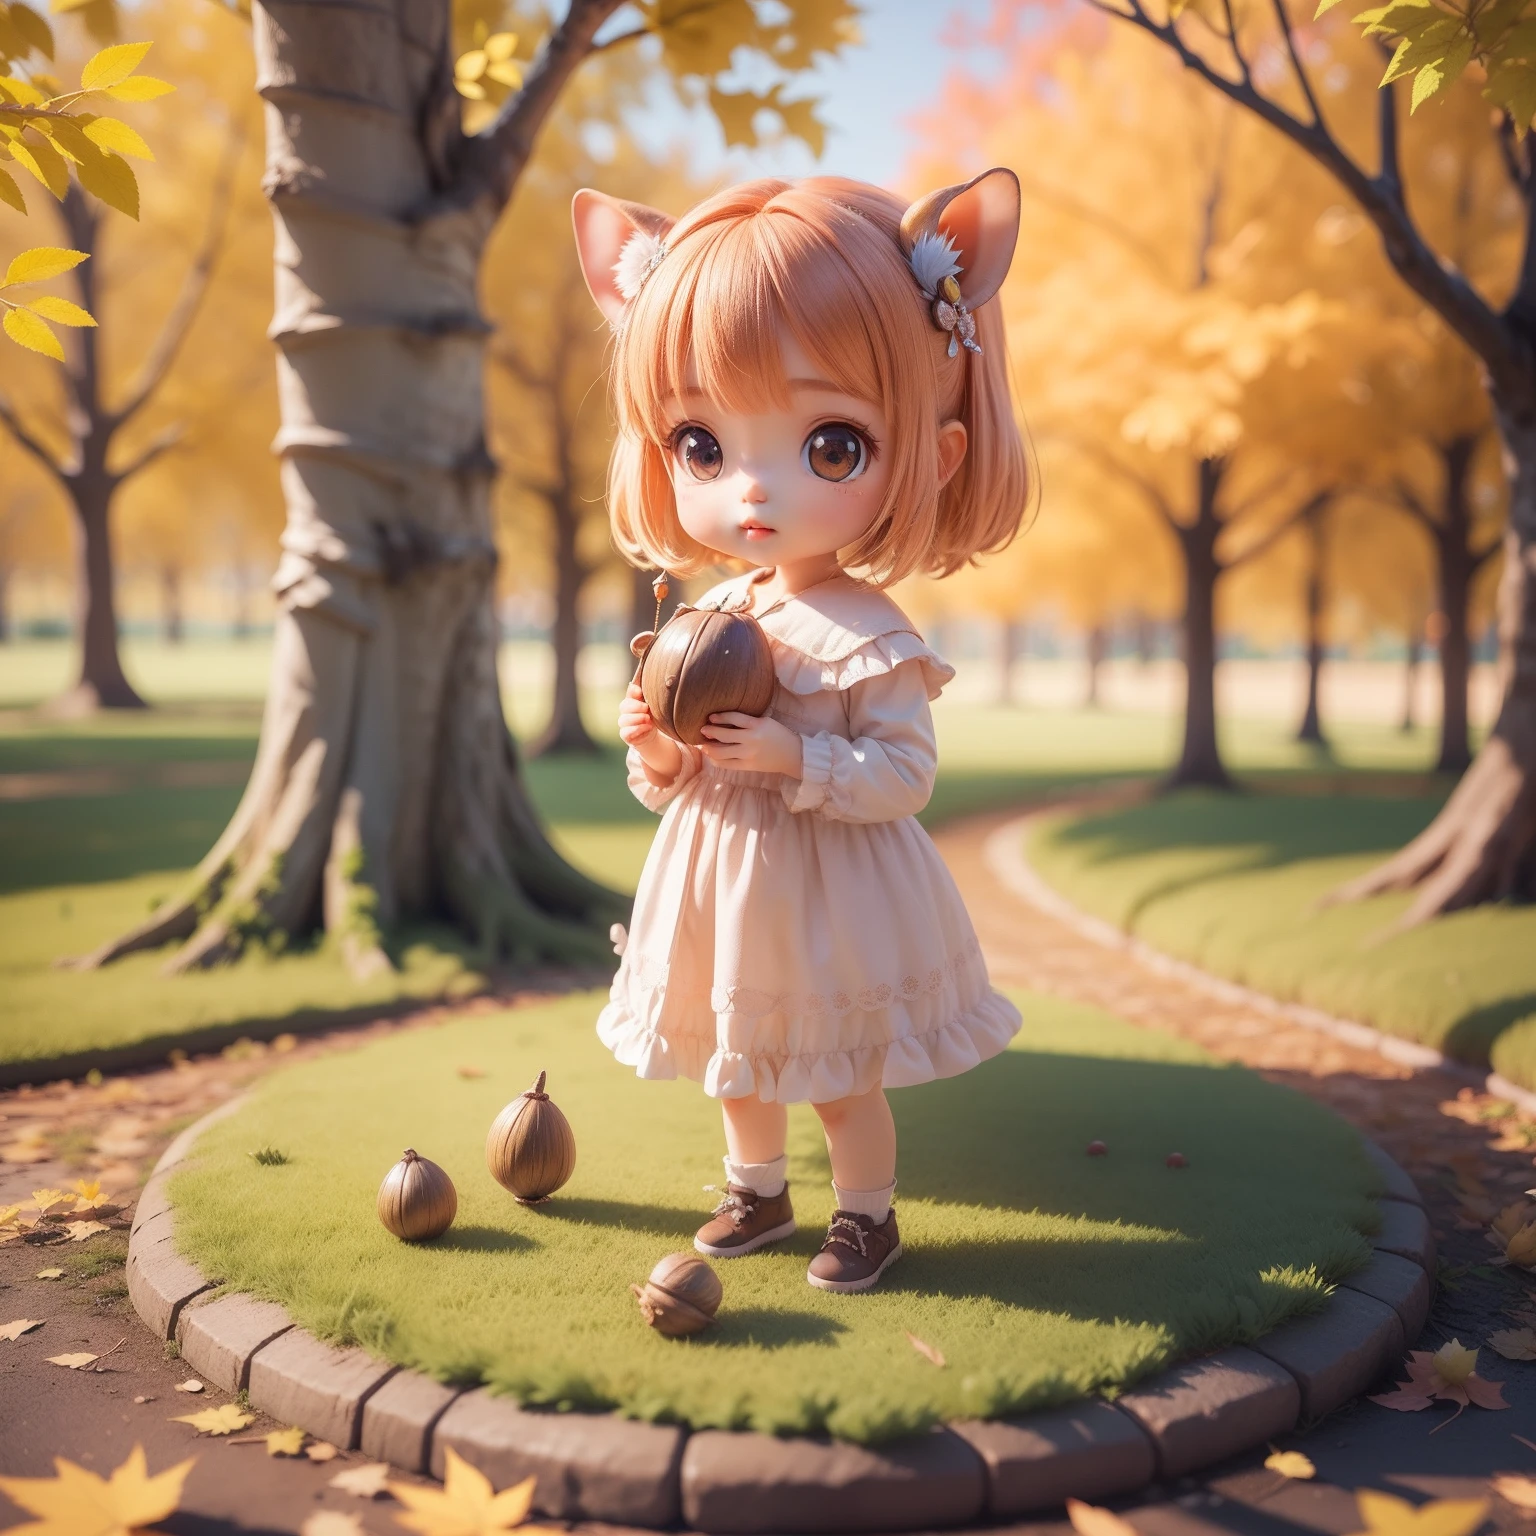 Cute Baby Chibi Anime,(((Chibi 3D))) (Best Quality) (Master Price)、（Fairy Squirrel:1.4)、Autumn in the fairytale forest、Holding an acorn in both hands
Waiting to start